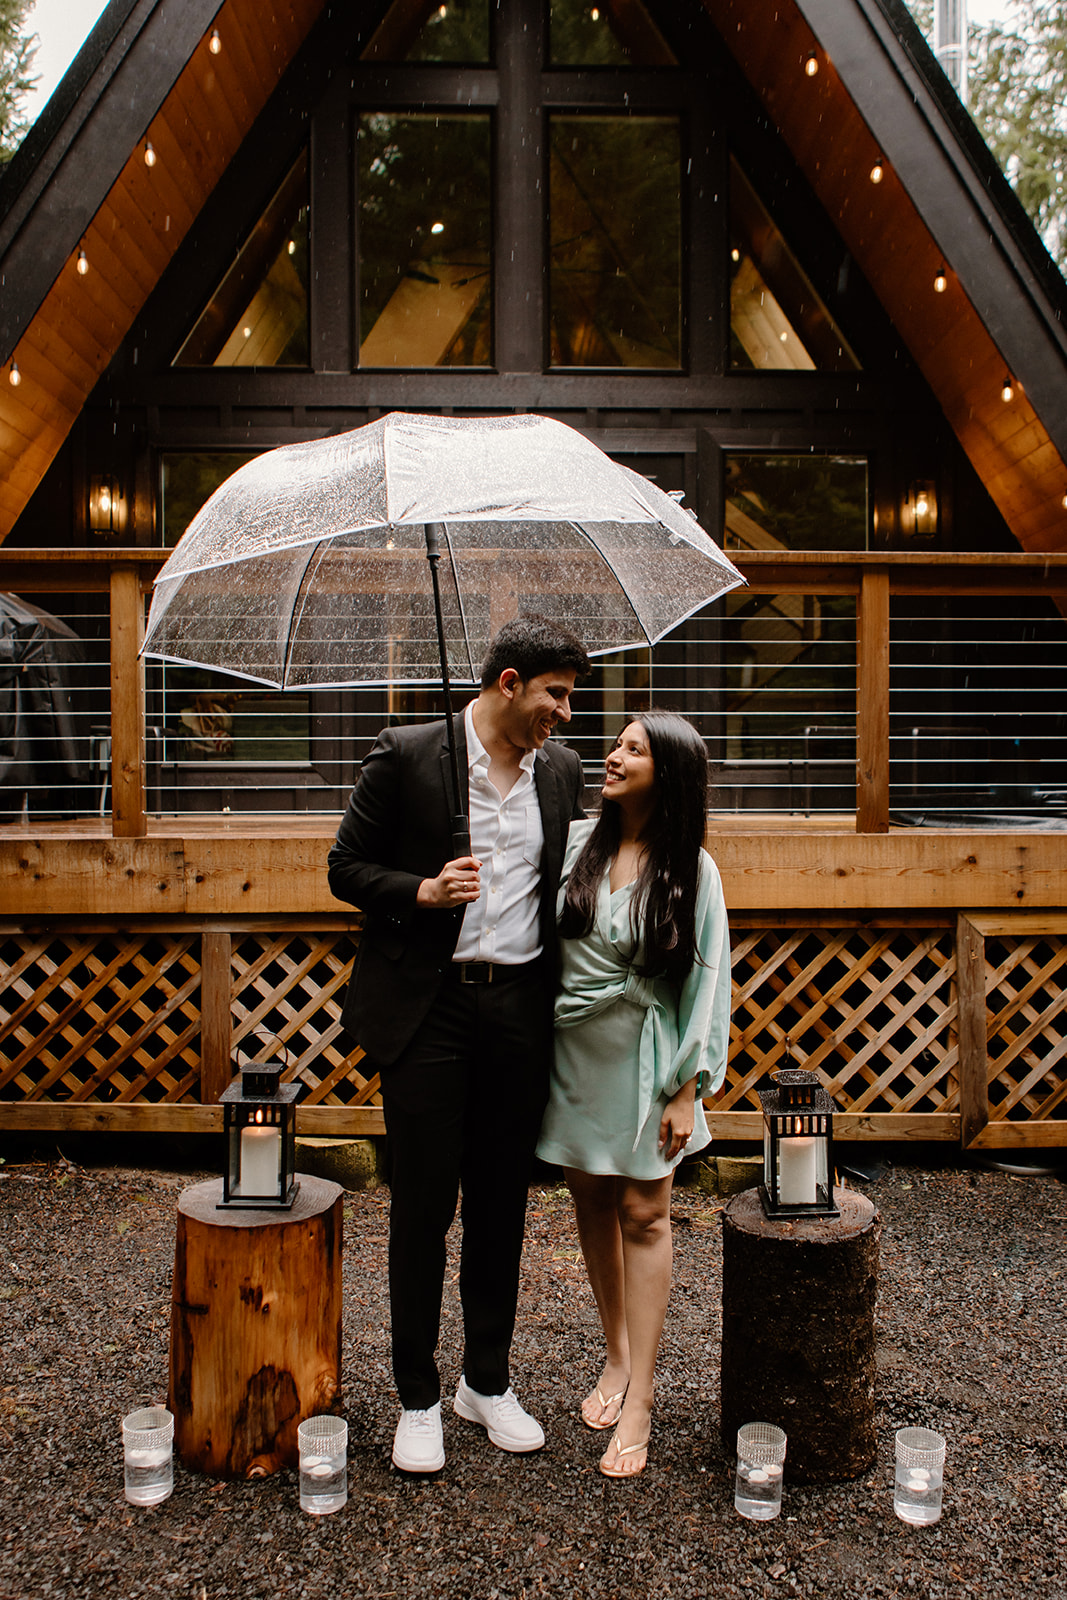 A couple share a ring exchange ceremony at an A-Frame cabin at the base of Mount Rainier to celebrate their engagement.